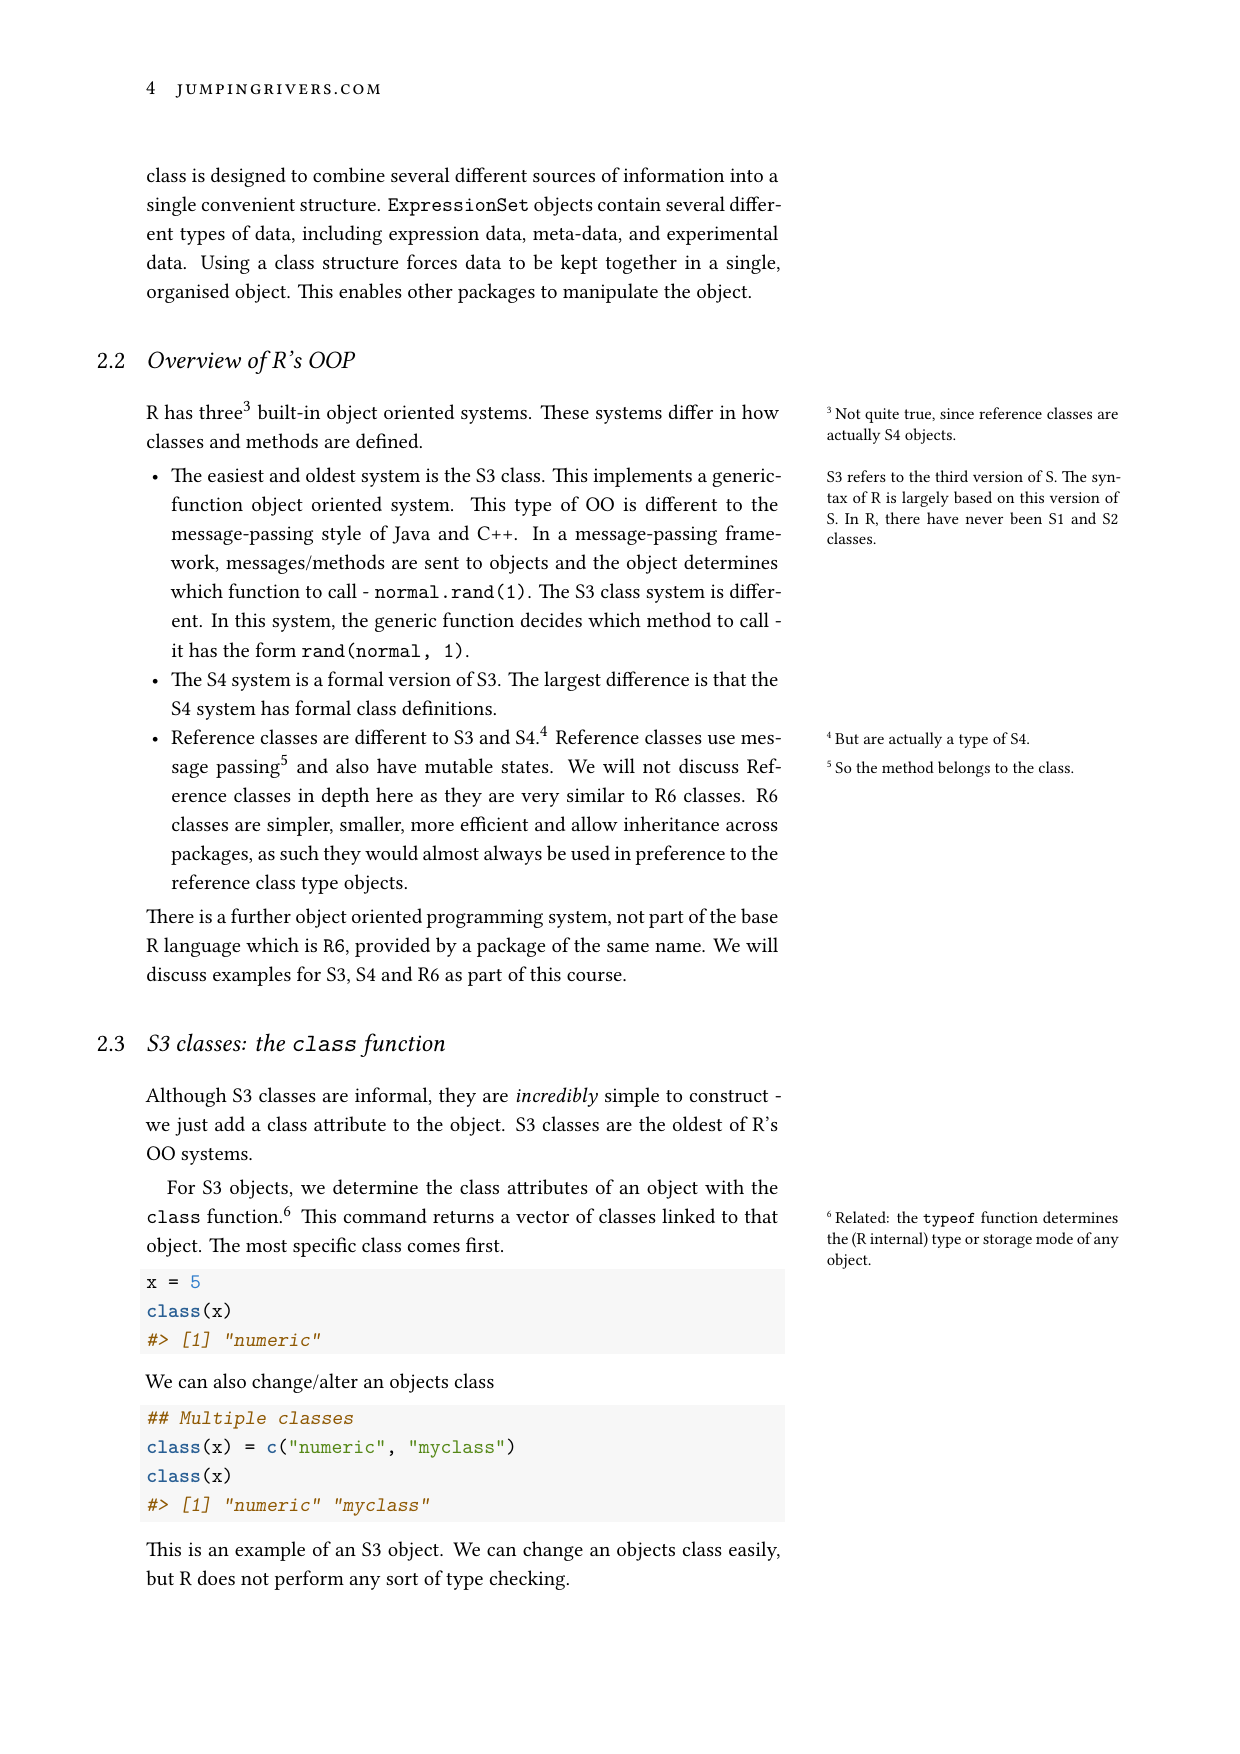 Page 5 of example course material for Object Oriented Programming in R